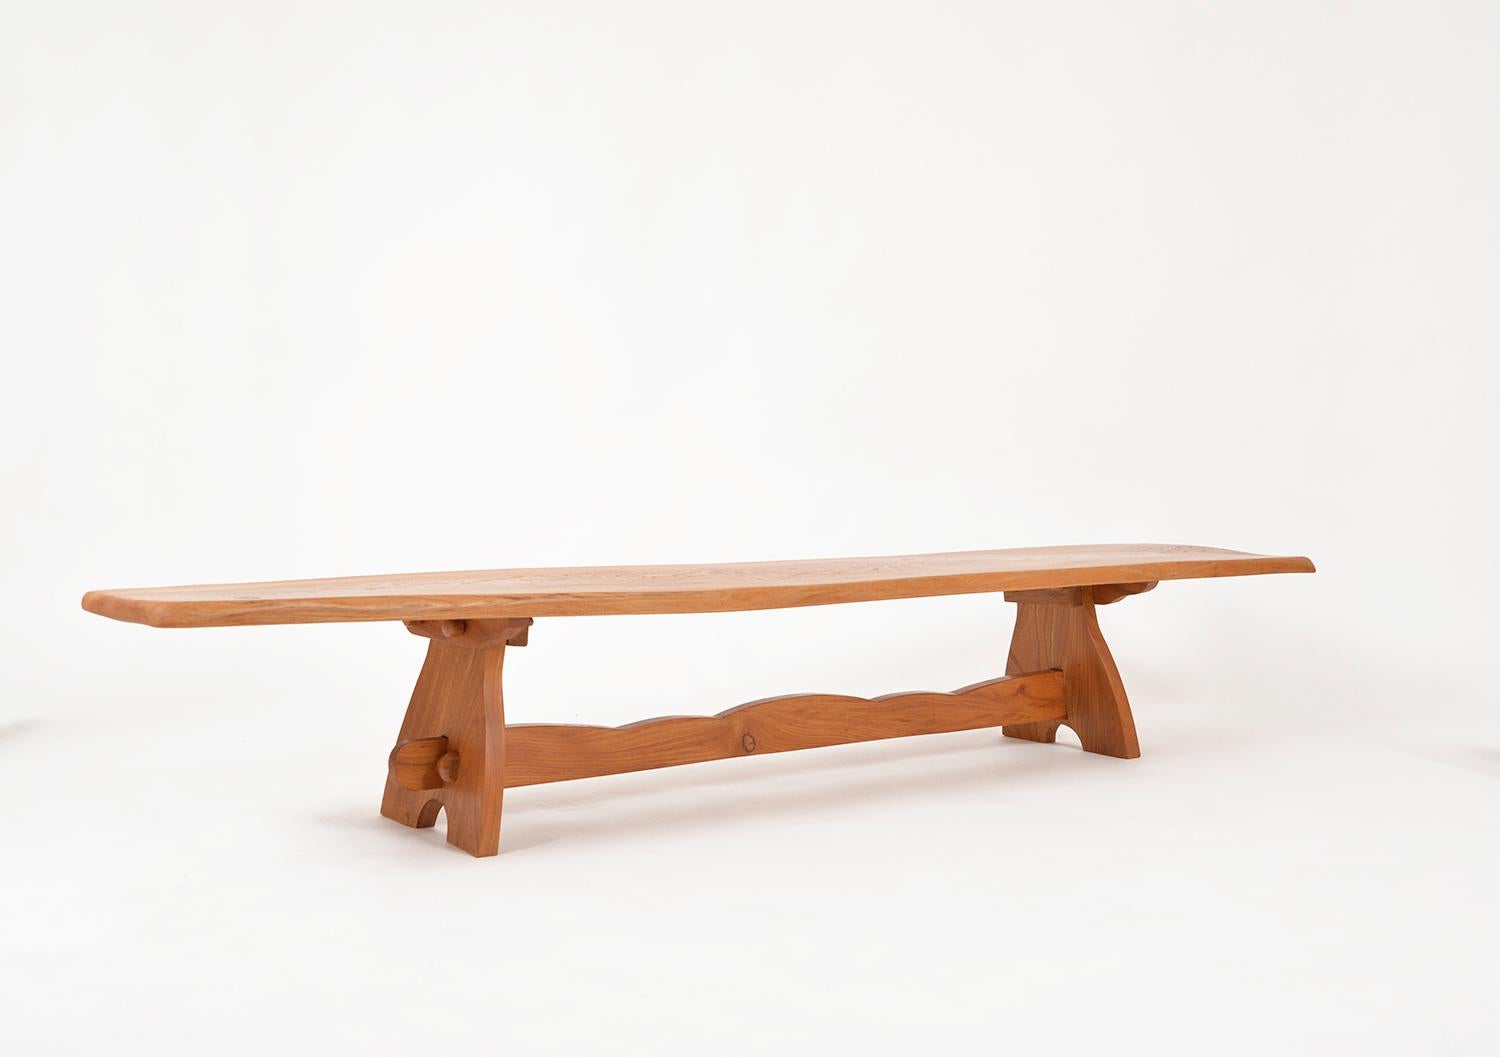 A really beautiful craftsman made 1970s long and low solid elm bench or low table. Of traditional pegged construction, with a wonderful waney edge and beautiful natural figuring to the top. The gentle corrugated stretcher is secured with a pegged